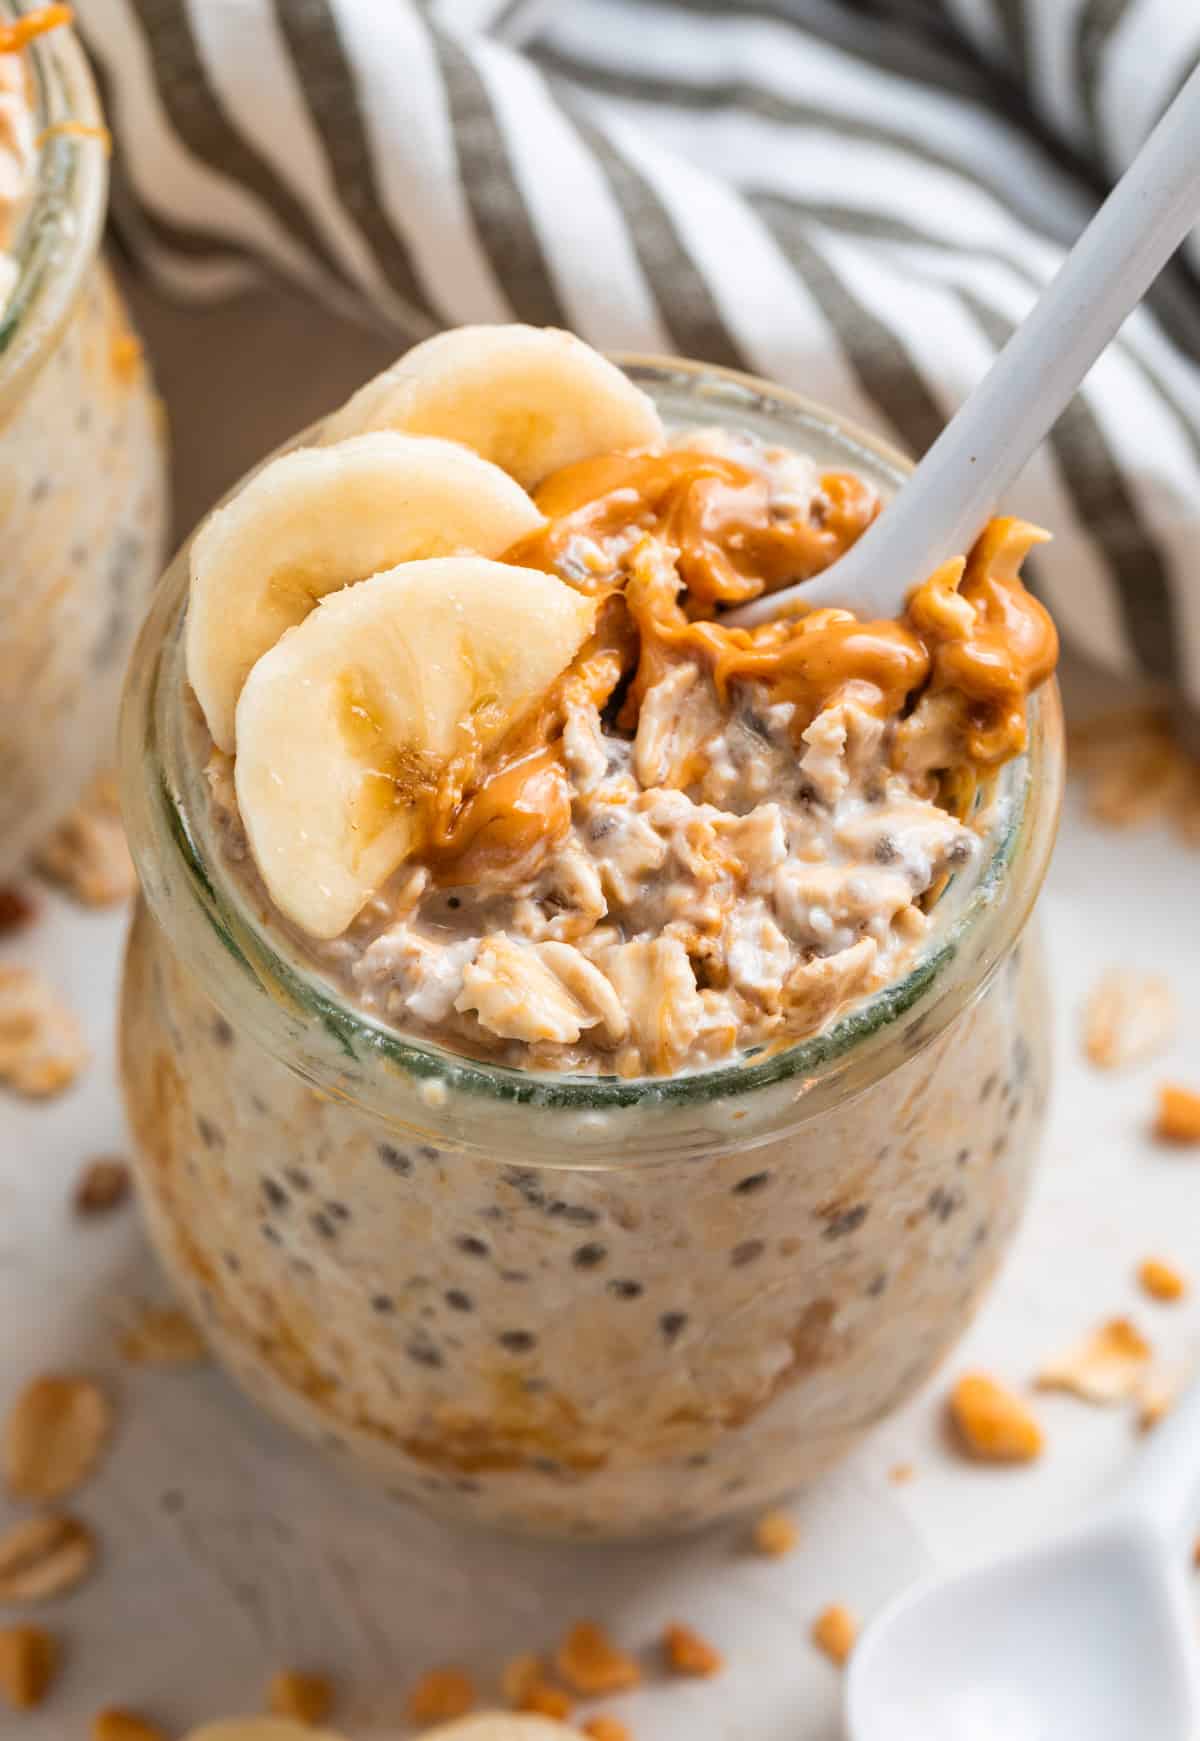 Spoon in jar of overnight oatmeal with peanut butter and banana.